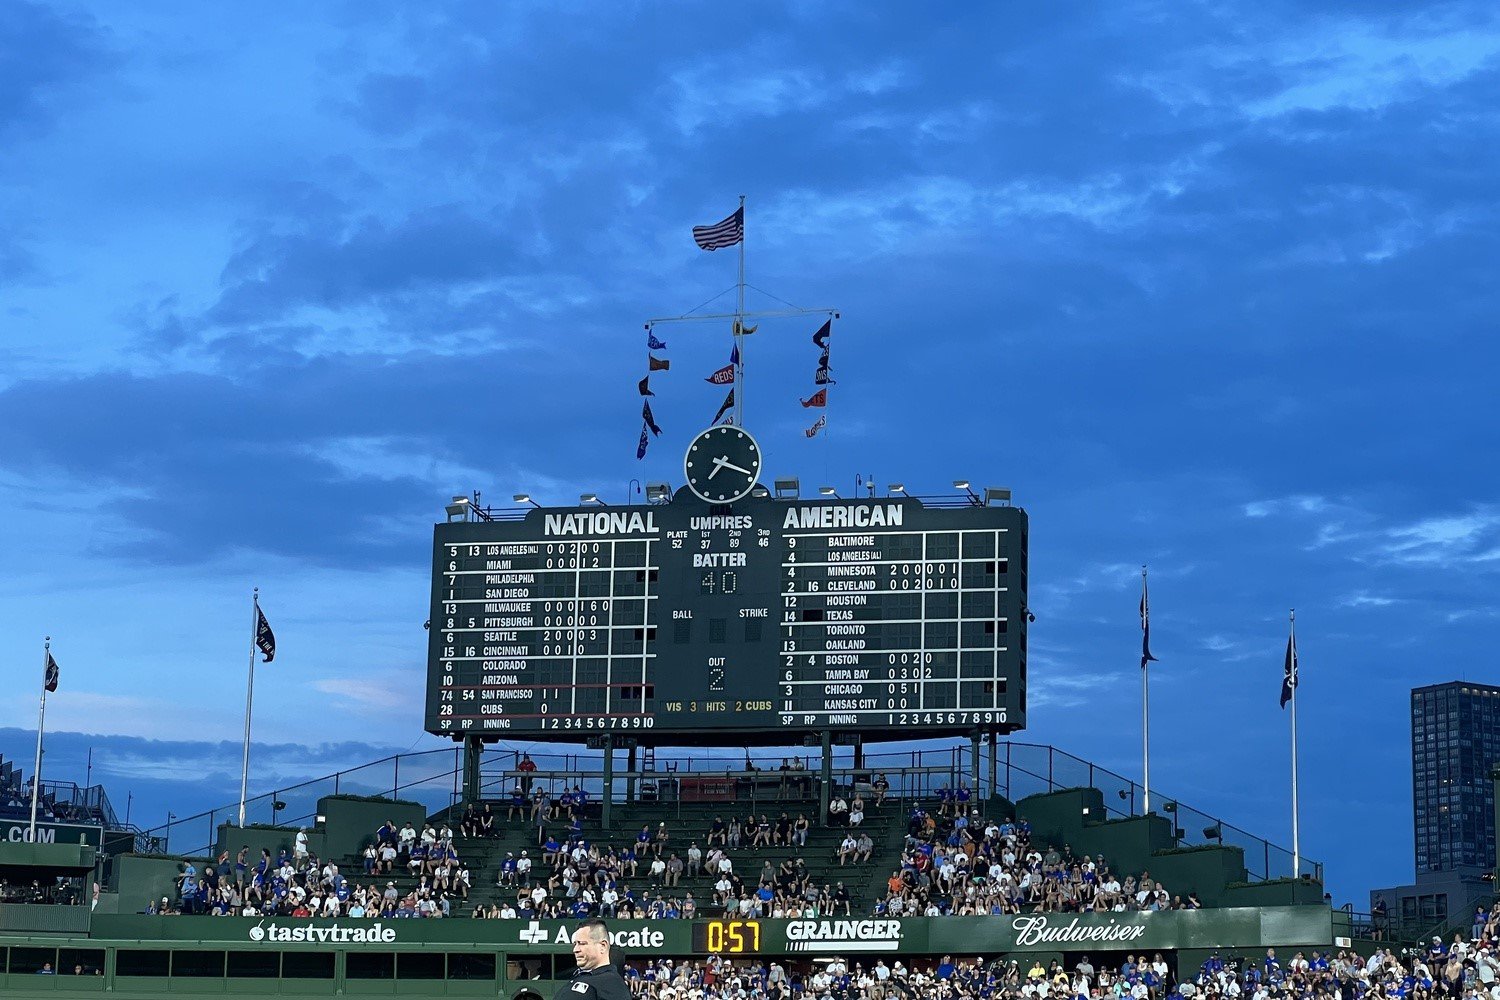 Back in the bleachers: Returning to Wrigley Field for the first